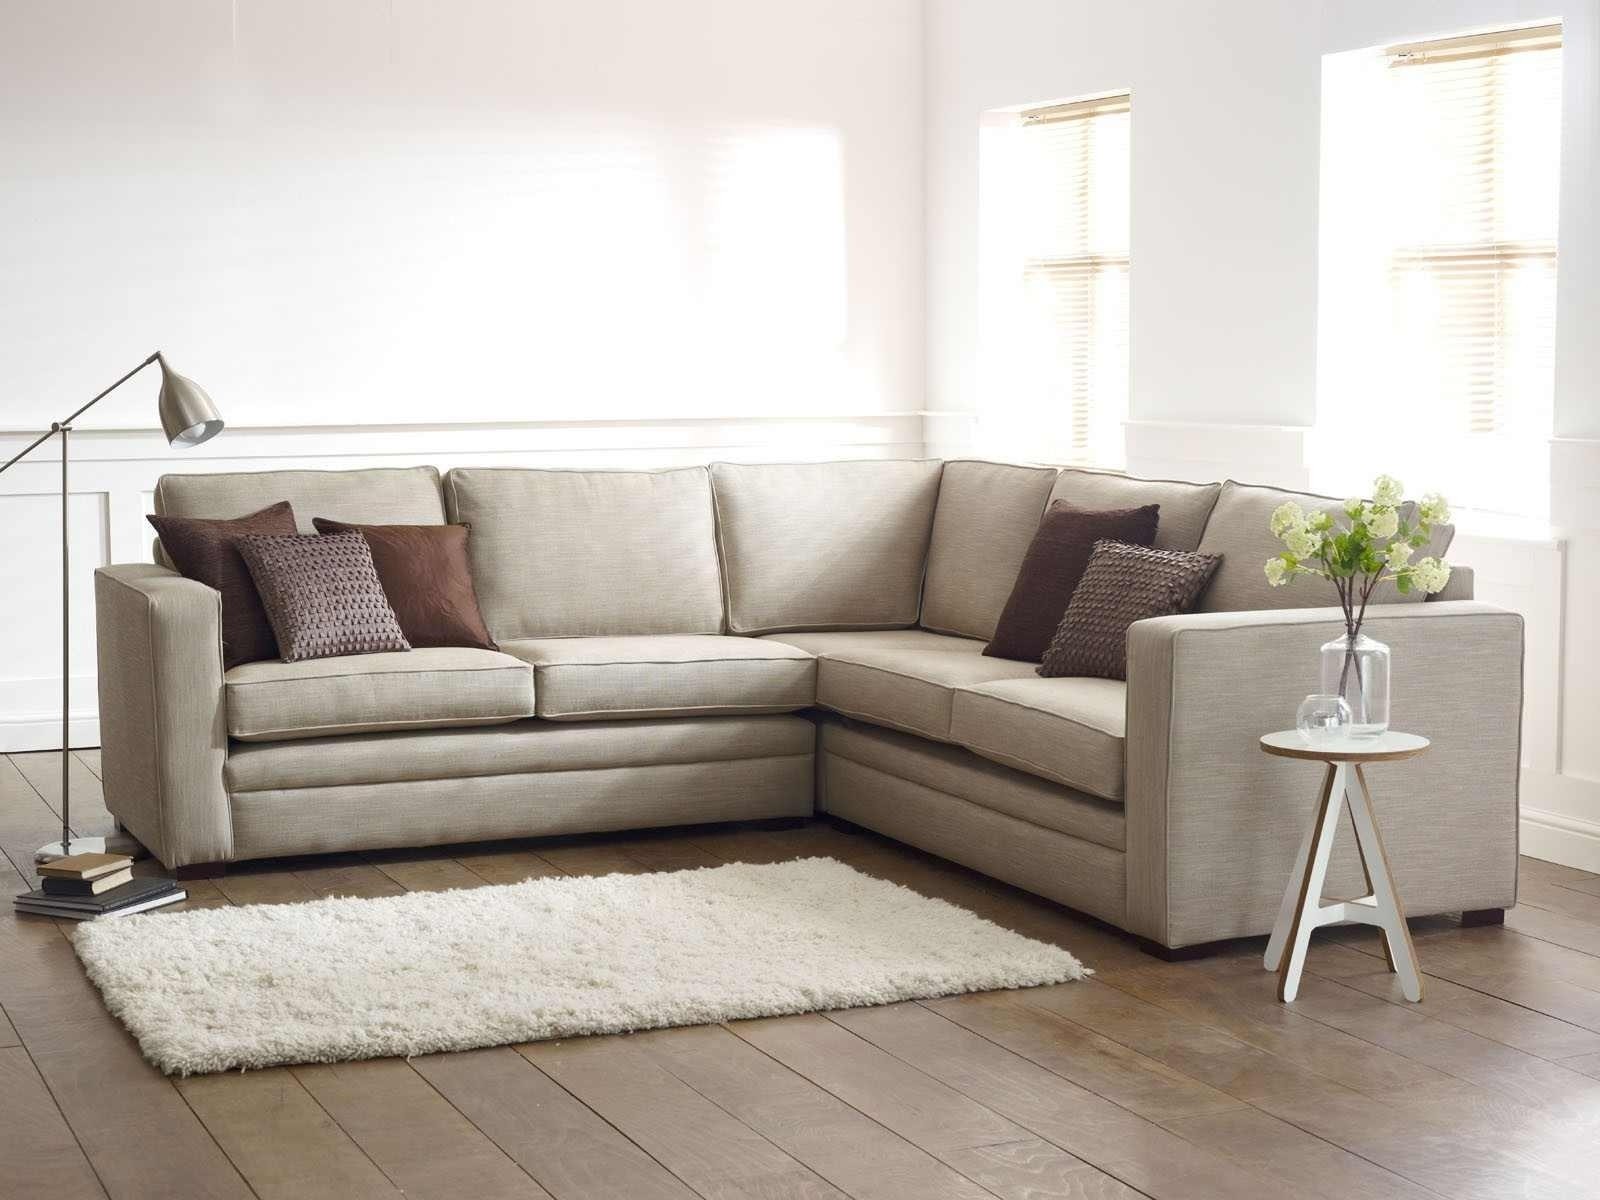 20 ideas of small l shaped sectional sofas sofa ideas